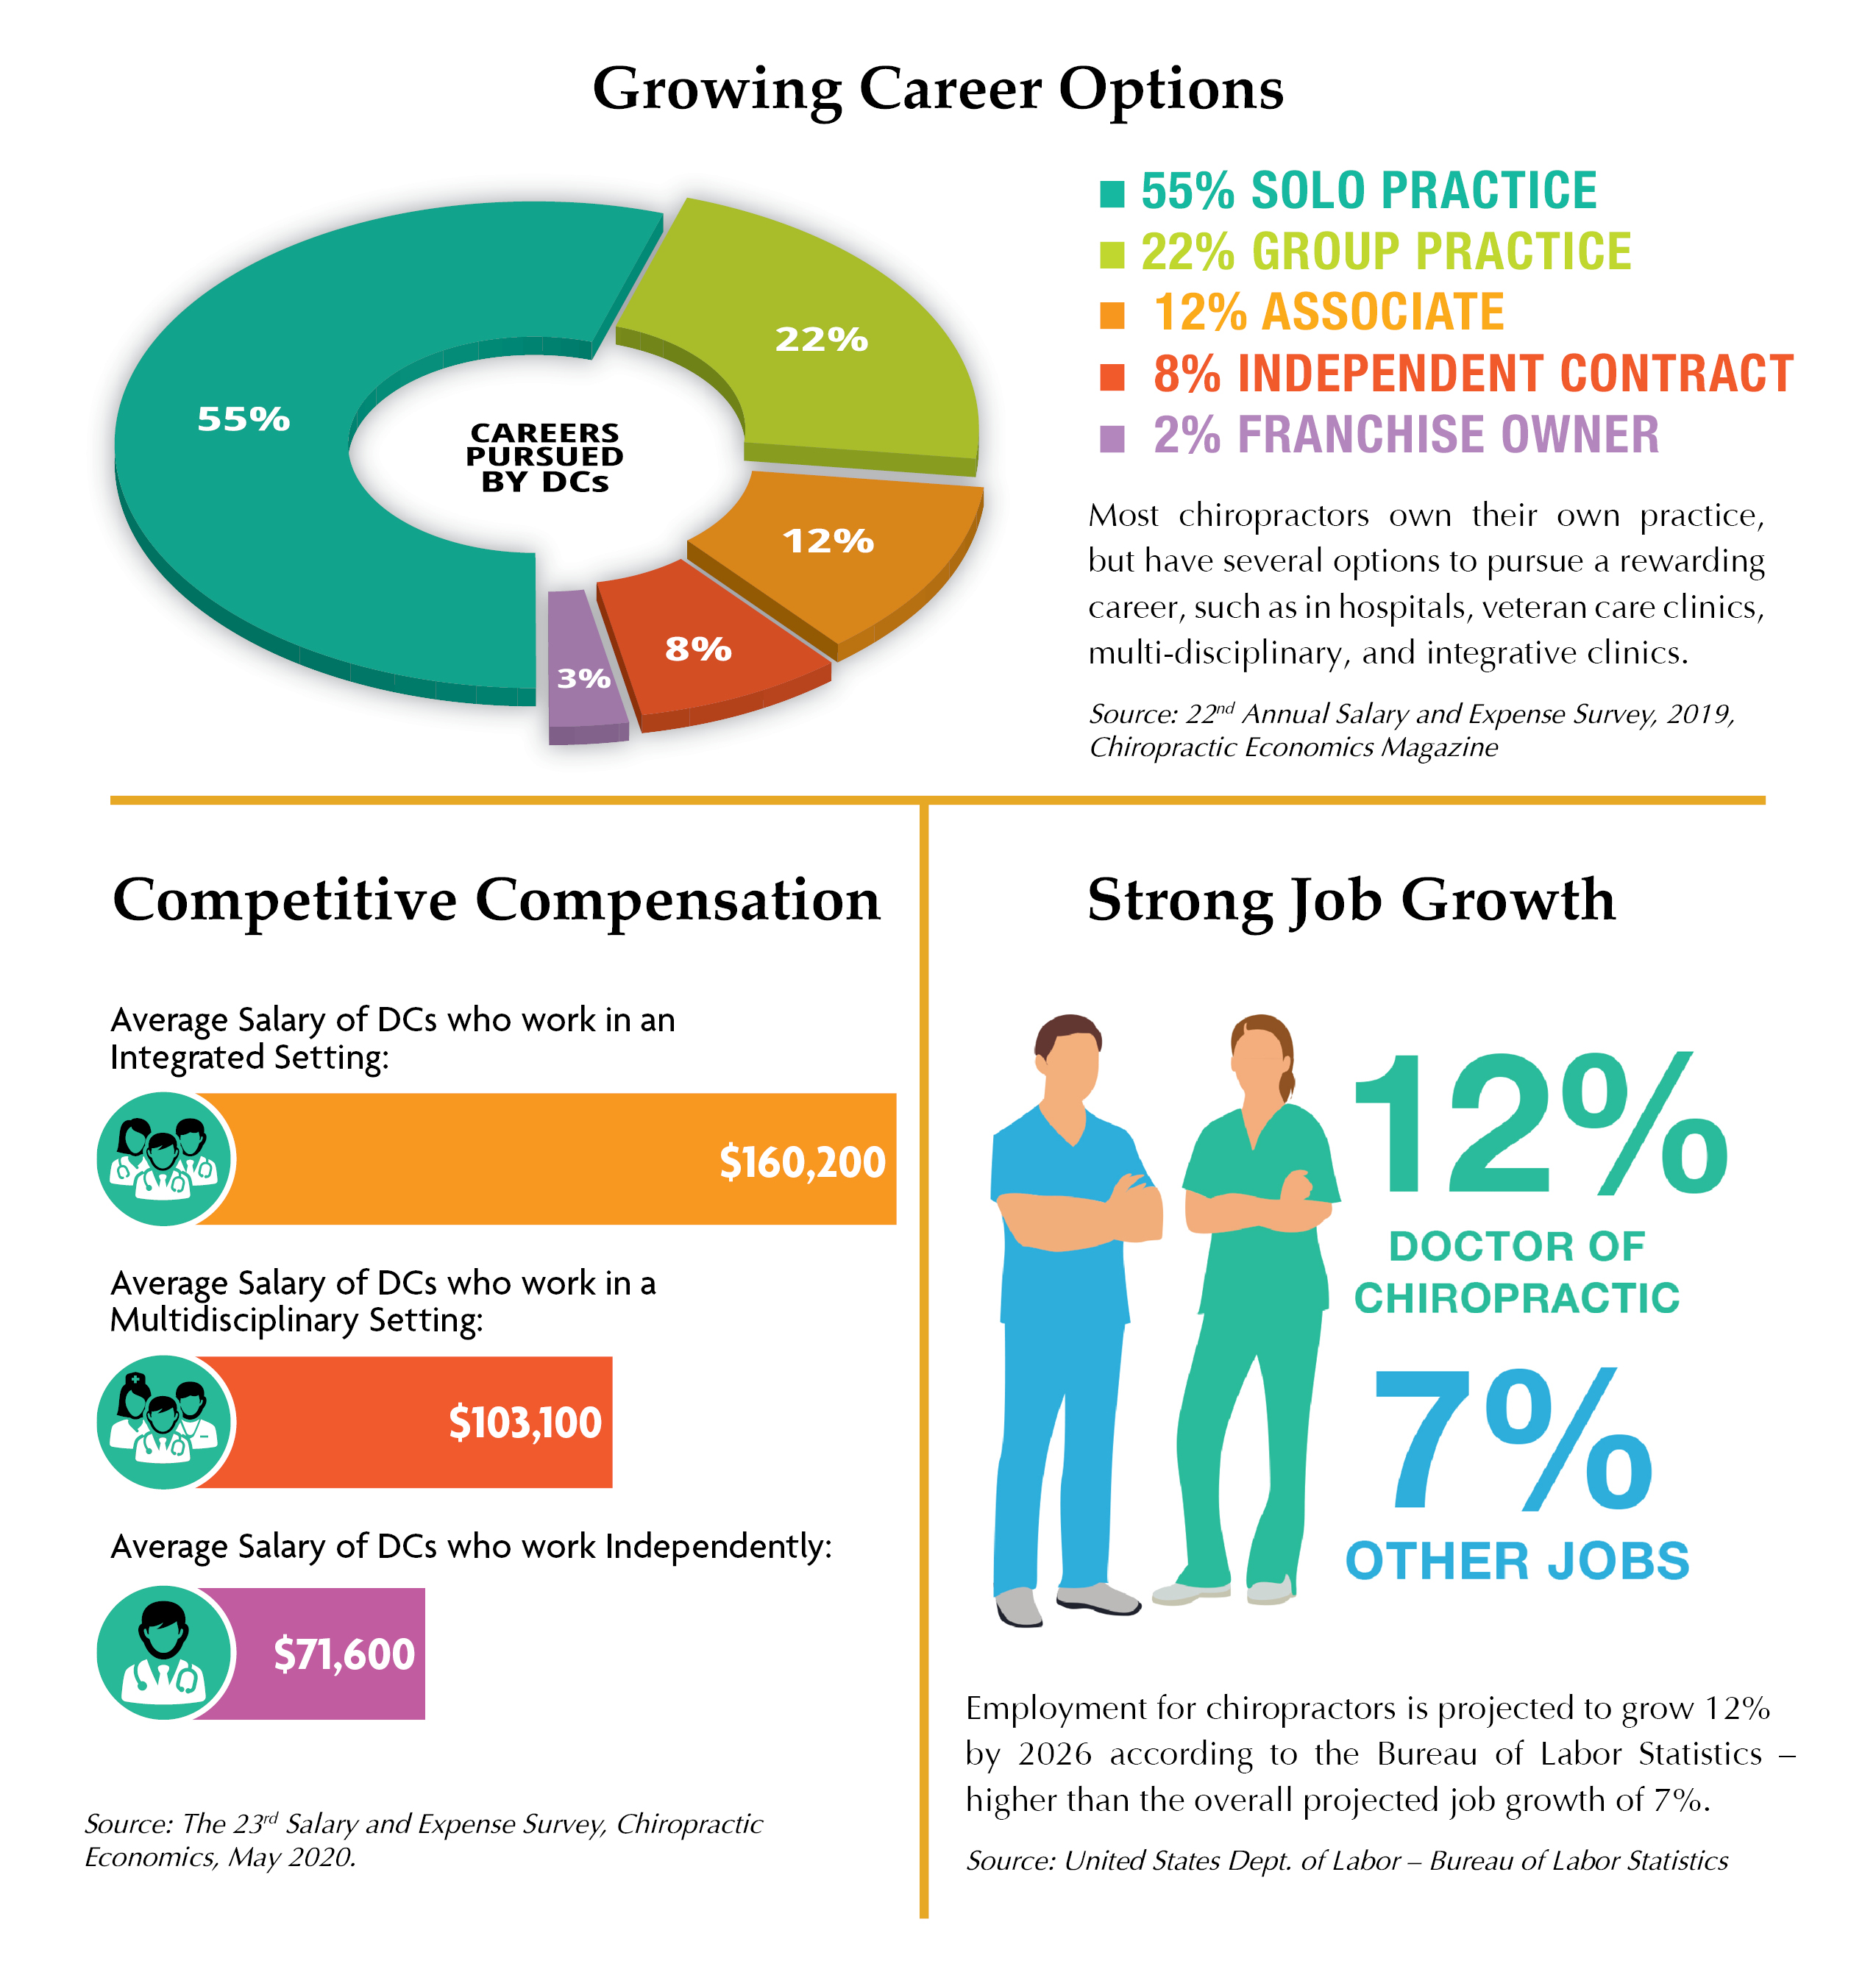 Chiropractic career options, competitive compensation, and job growth infographic